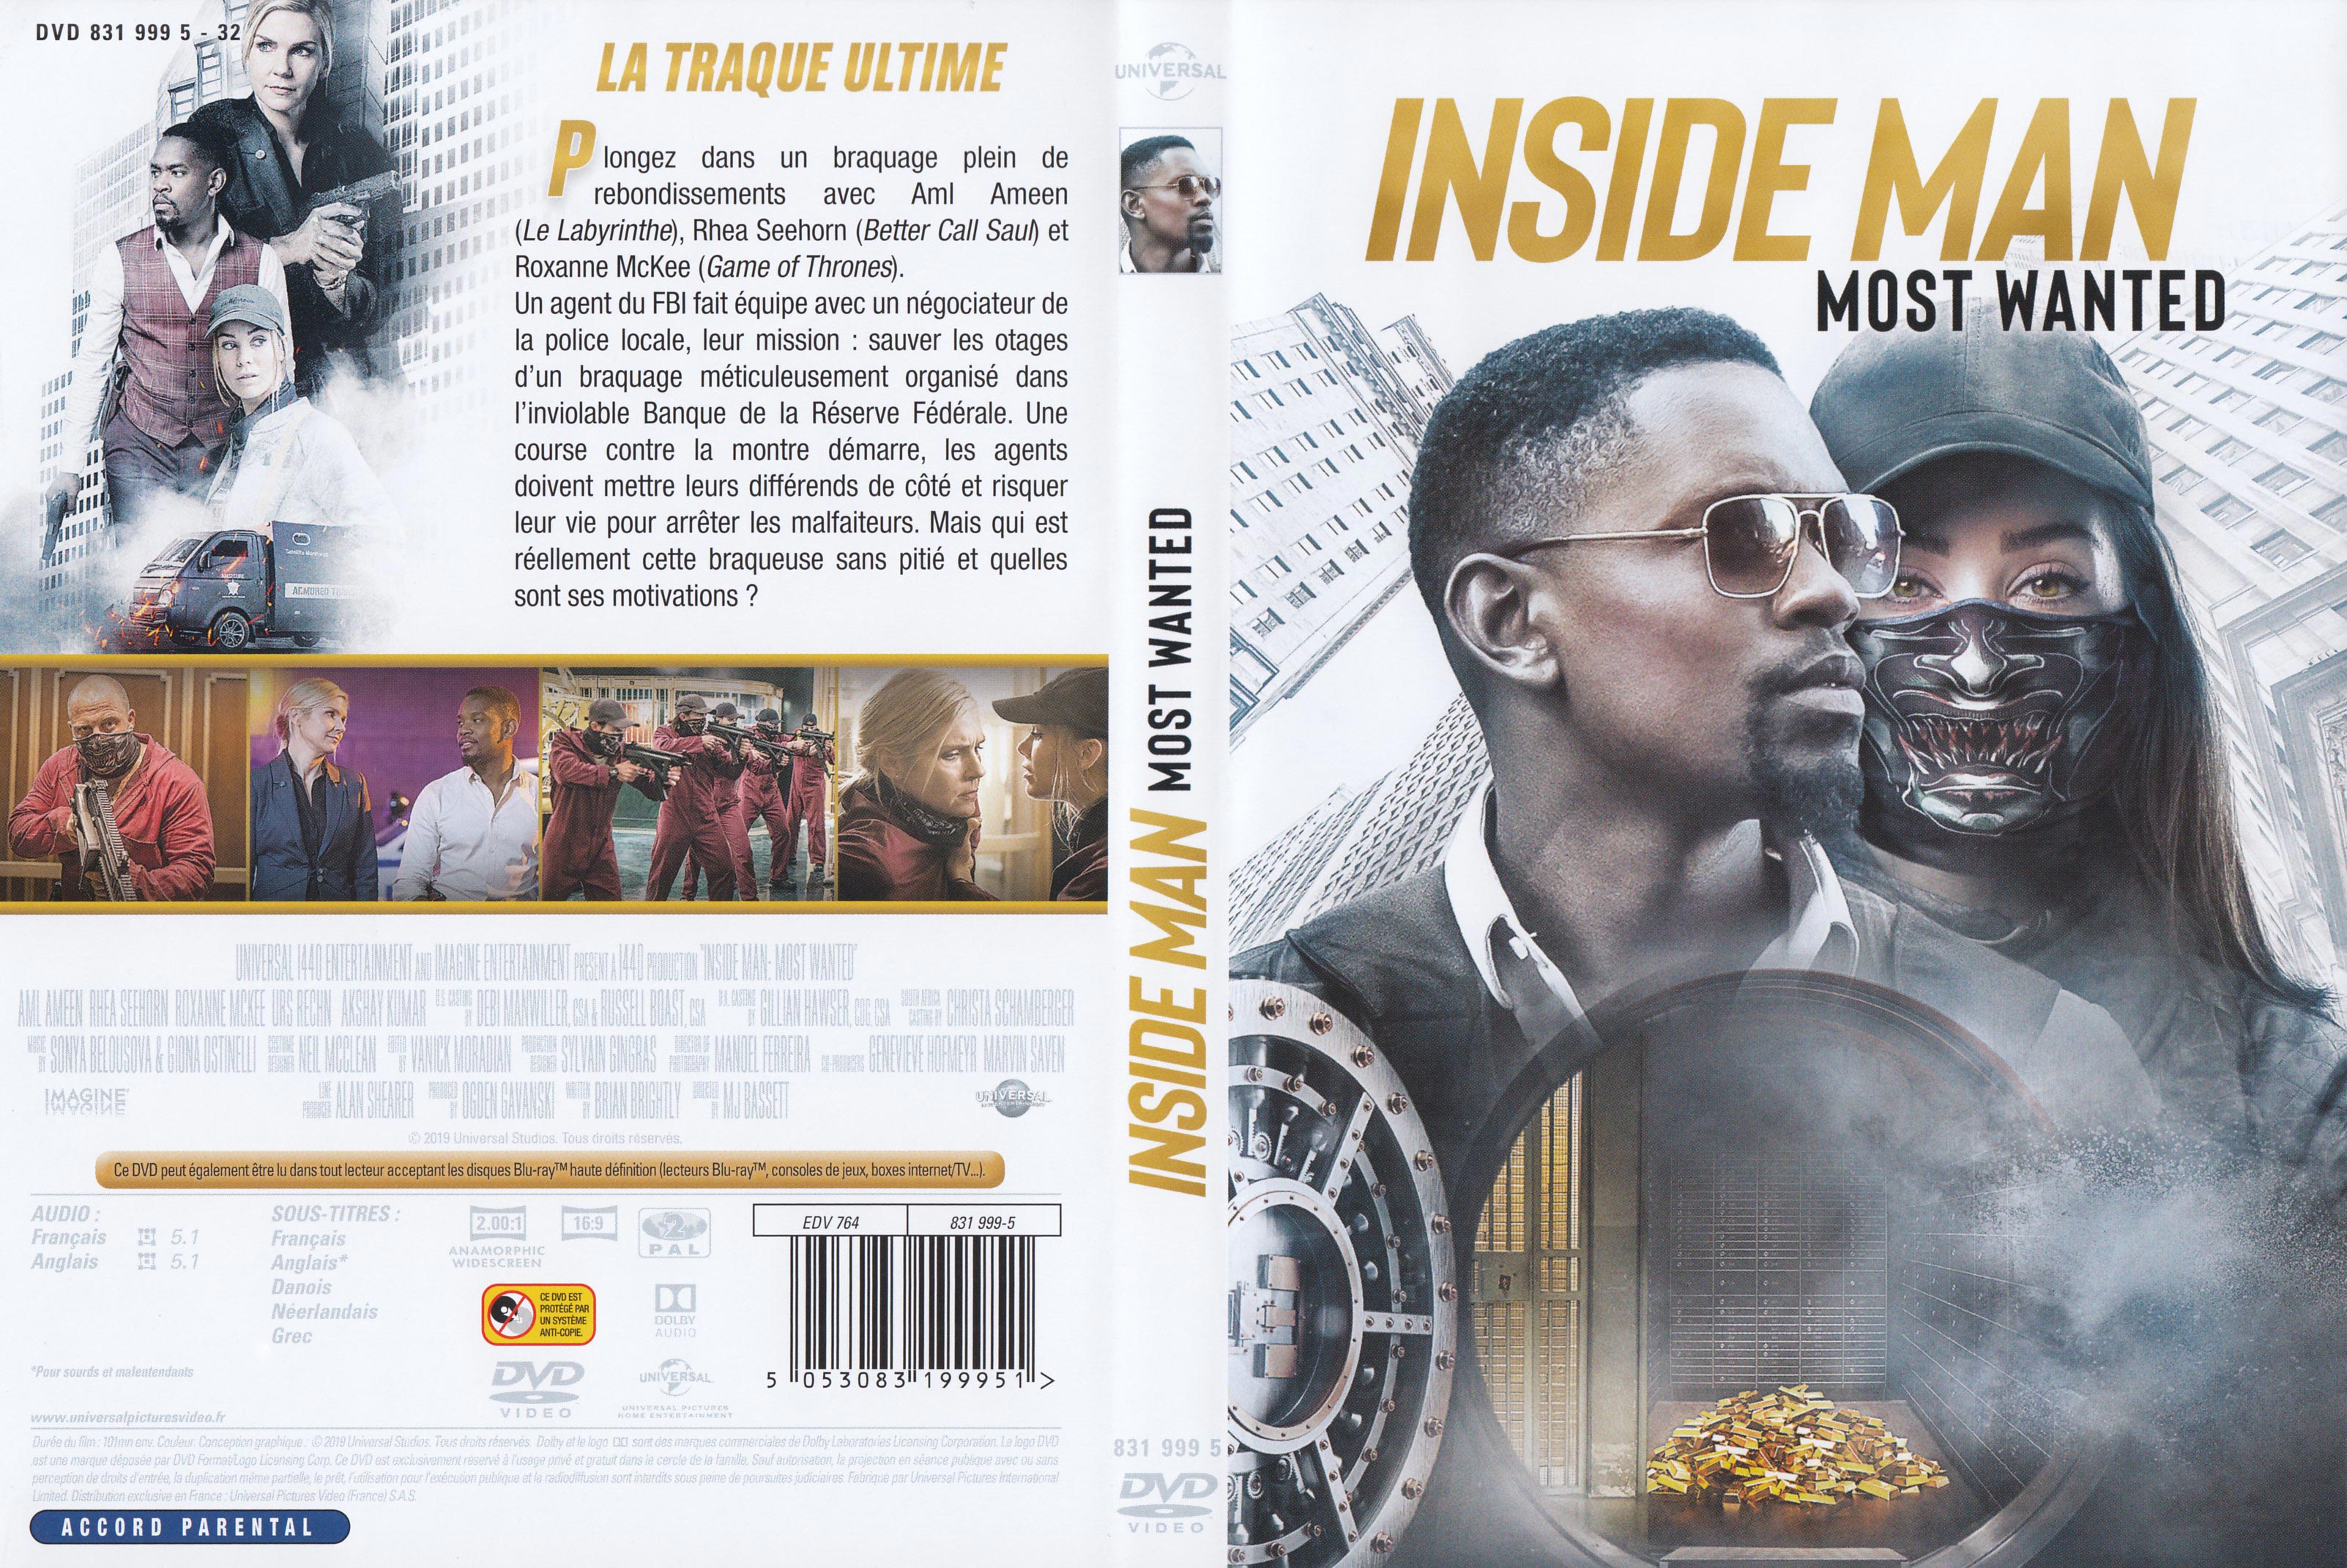 Jaquette DVD Inside man most wanted